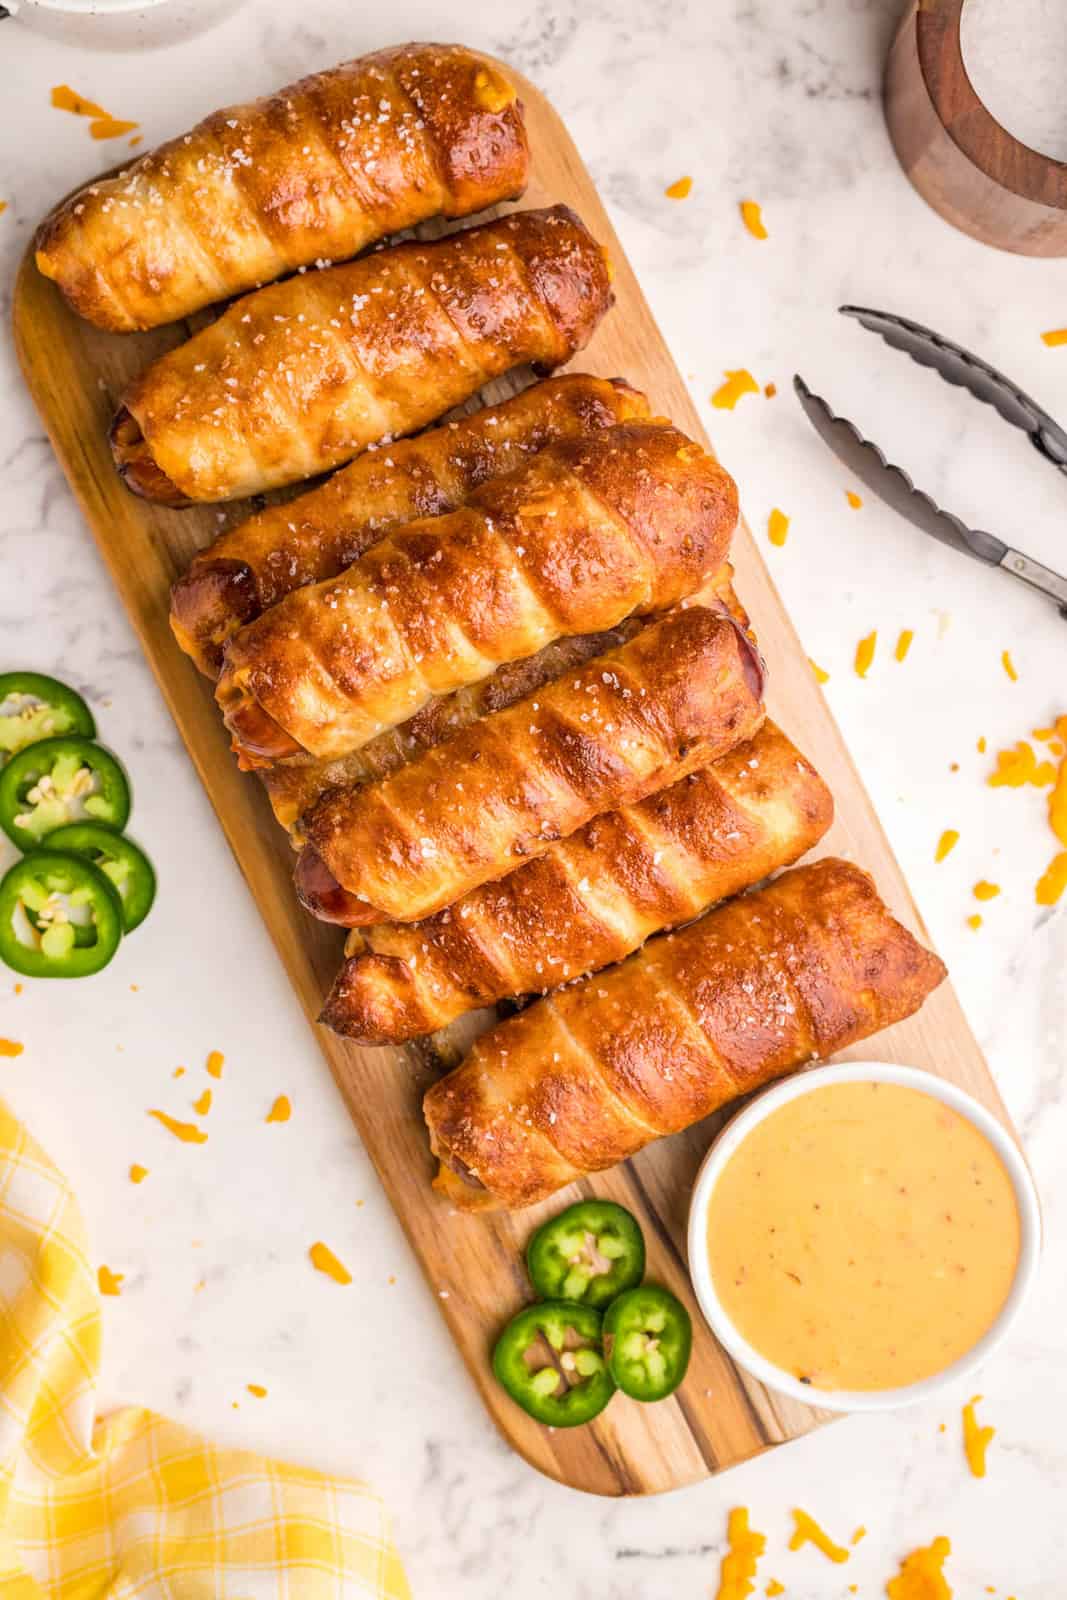 Overhead image of stacked pretzel dogs on wooden board with jalapenos and nacho cheese sauce.